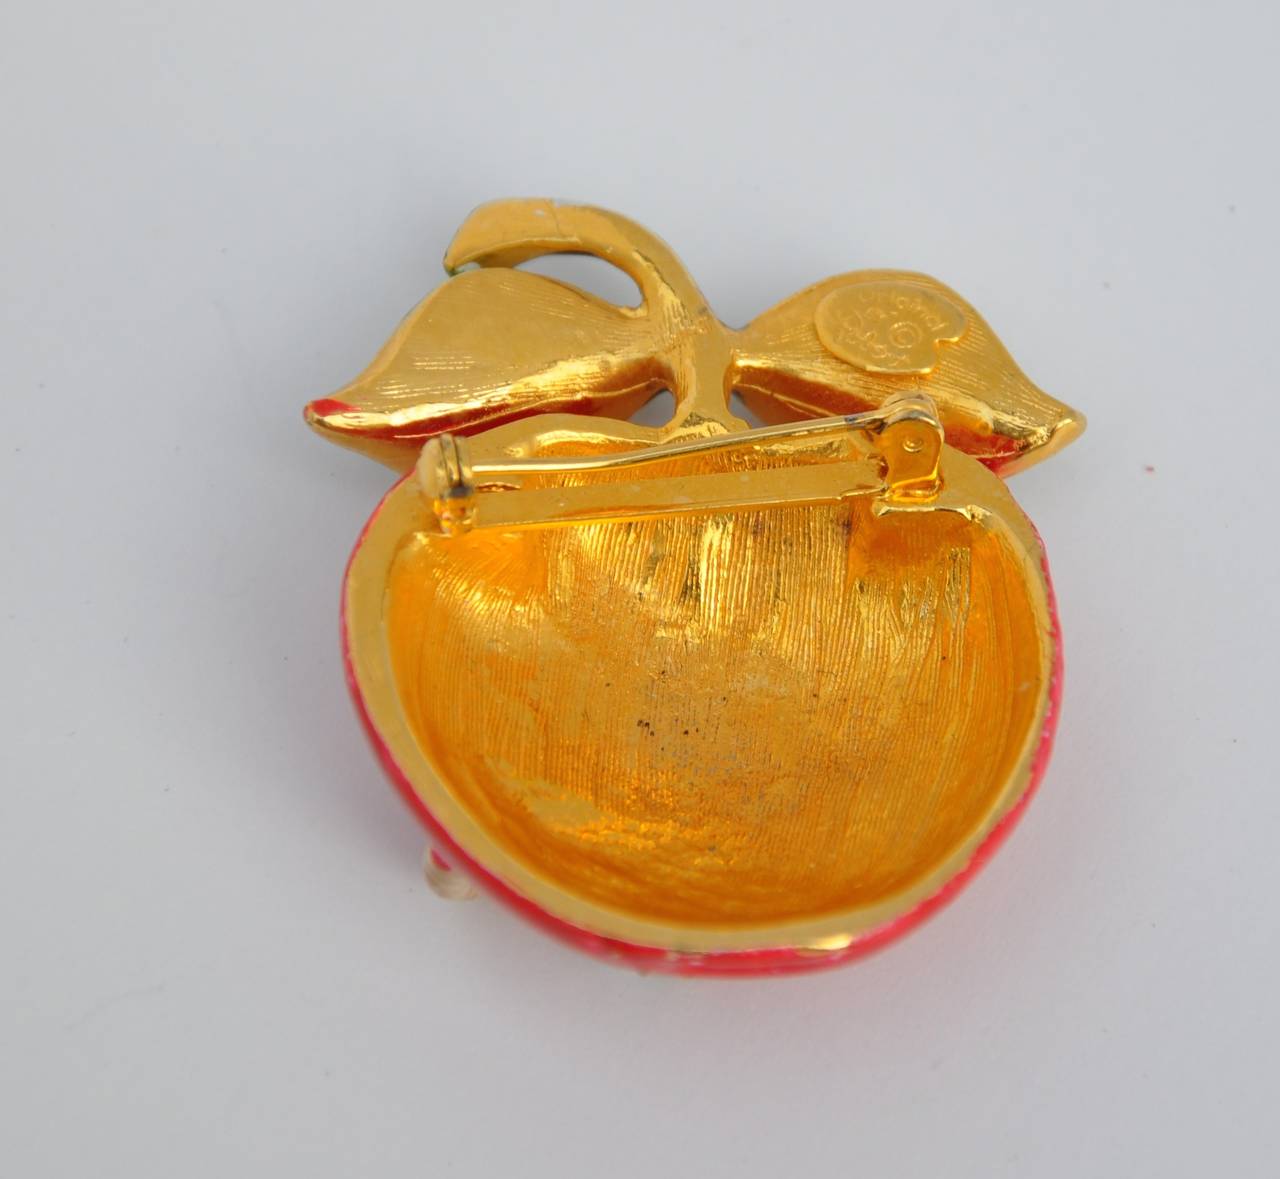 This wonderfully detailed "Apple with Worm" Gilded gold vermeil finished with enamel in red, green, brown and cream designed by "Original by Robero" measures 2" in height, 1 5/8" in width and 5/8" in depth. This